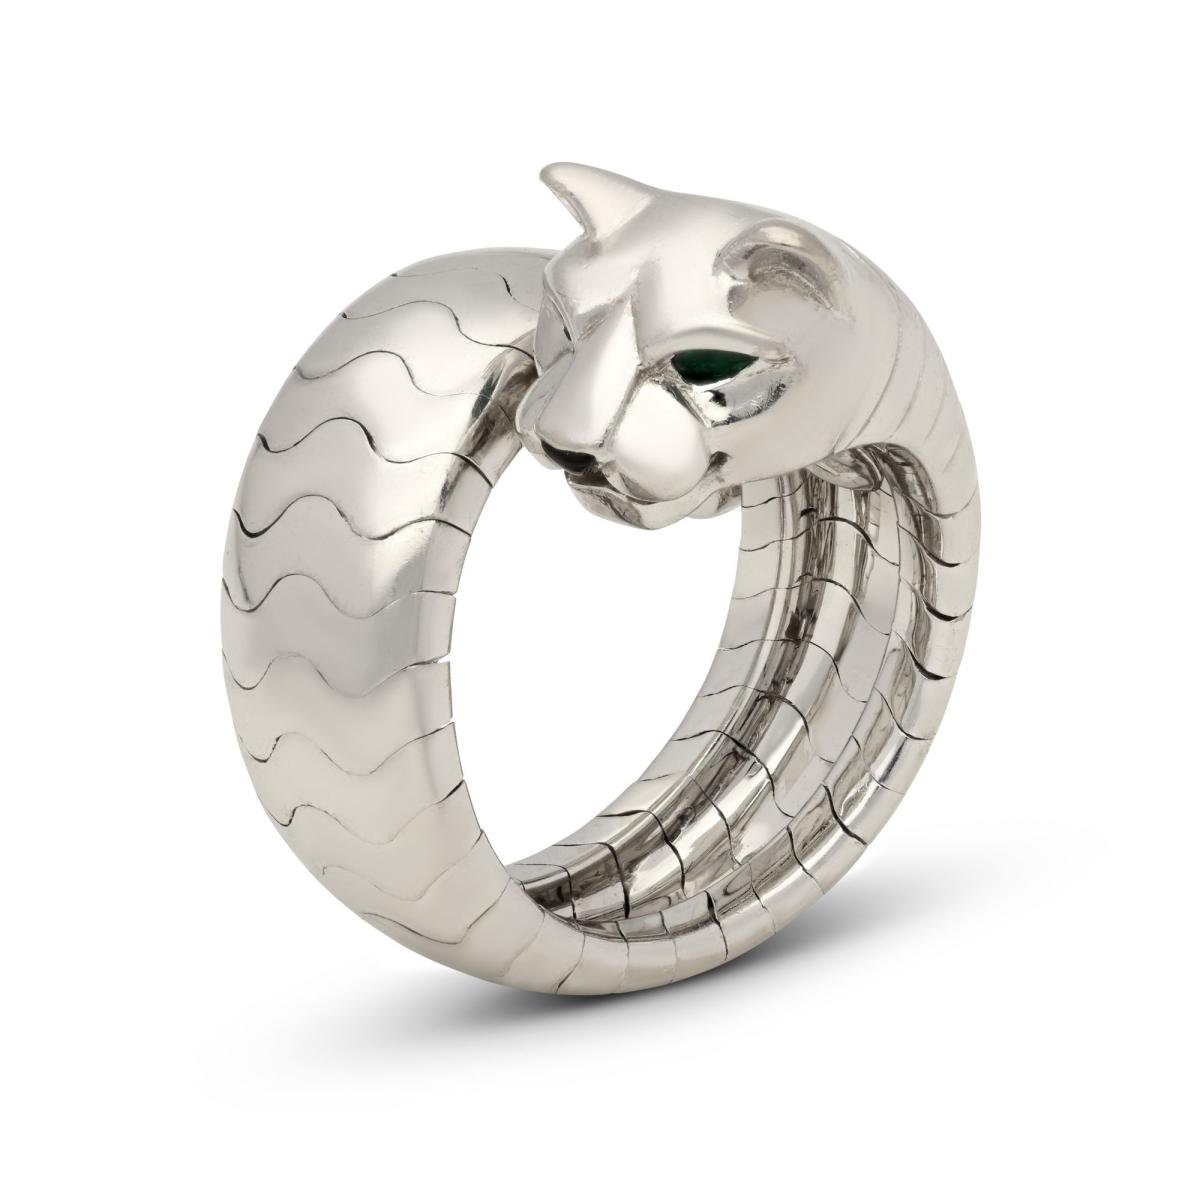 Cartier 18ct White Gold Panthère Lakarda Ring With Emerald Eyes Circa 2000s